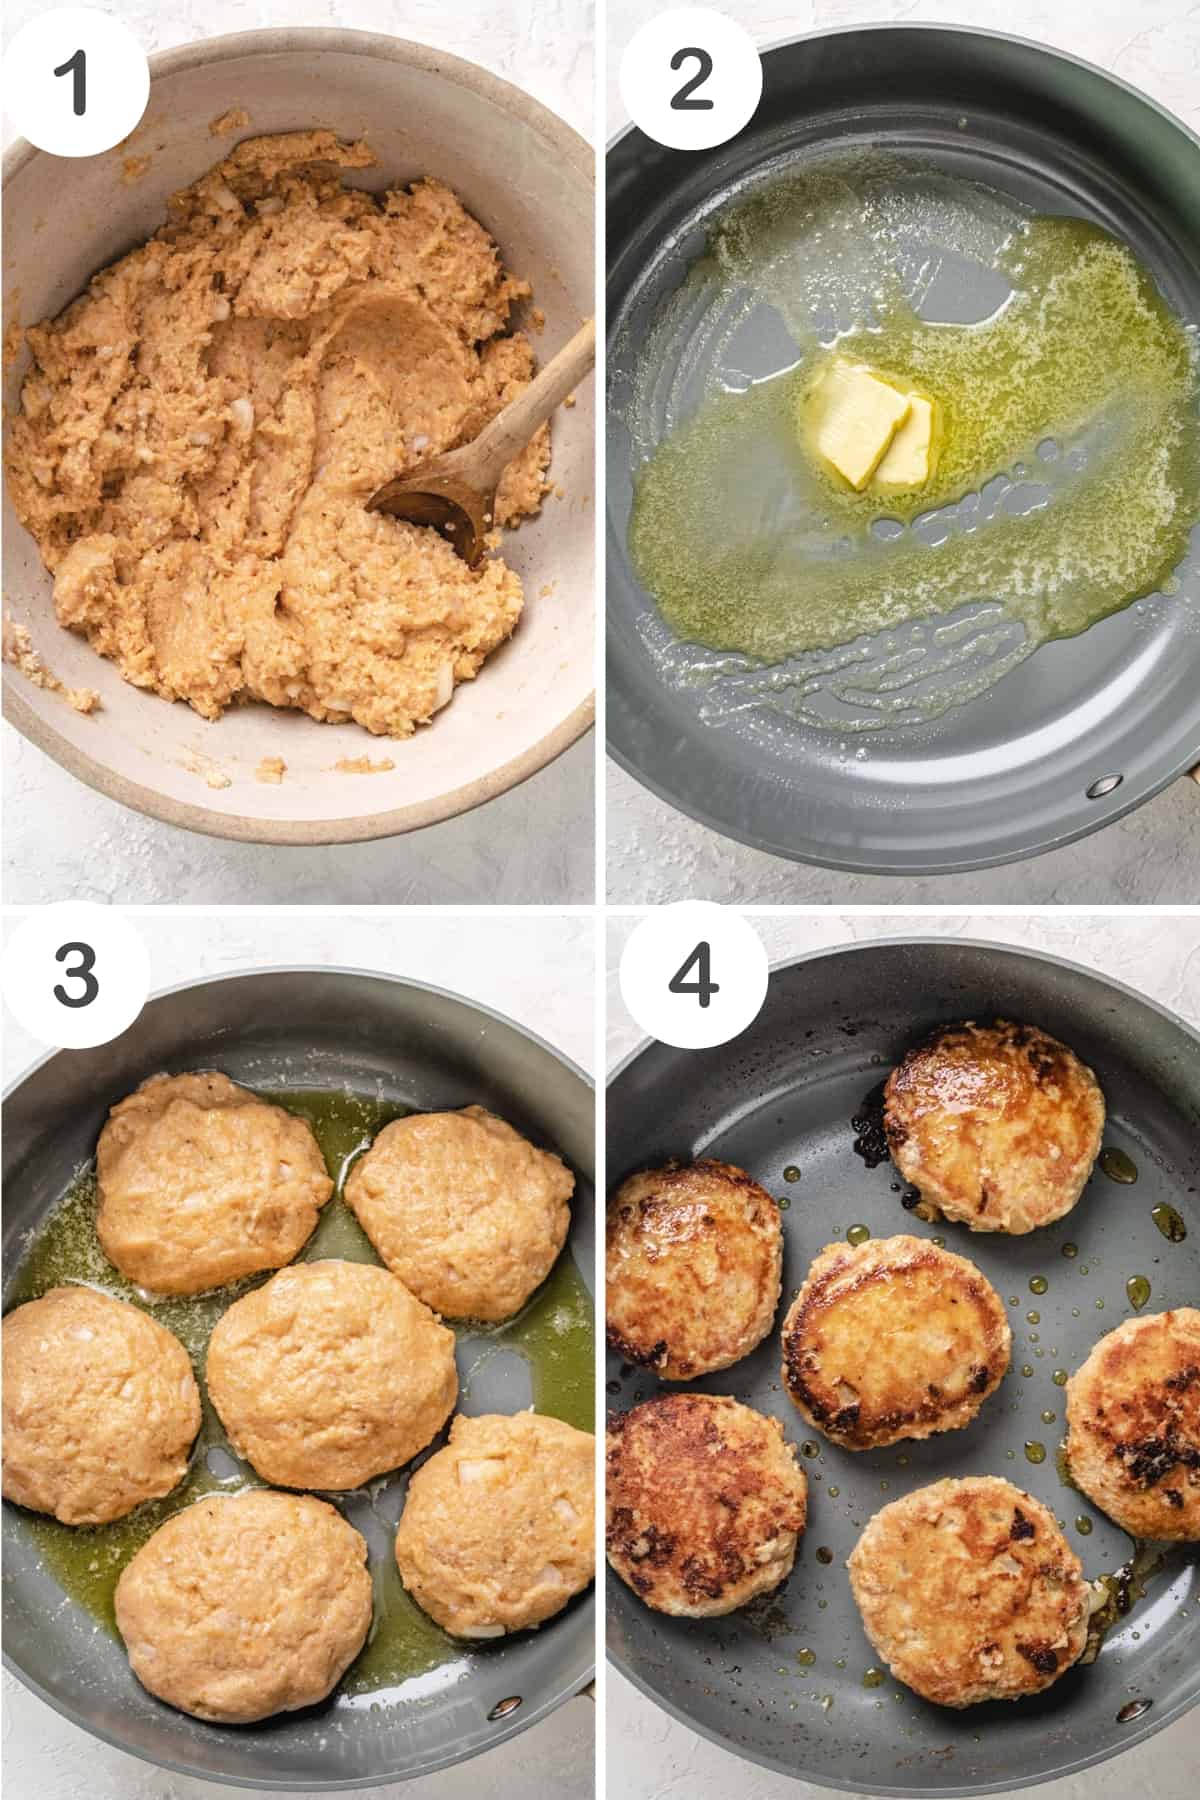 numbered step by step photos showing how to make these chicken patties in a skillet